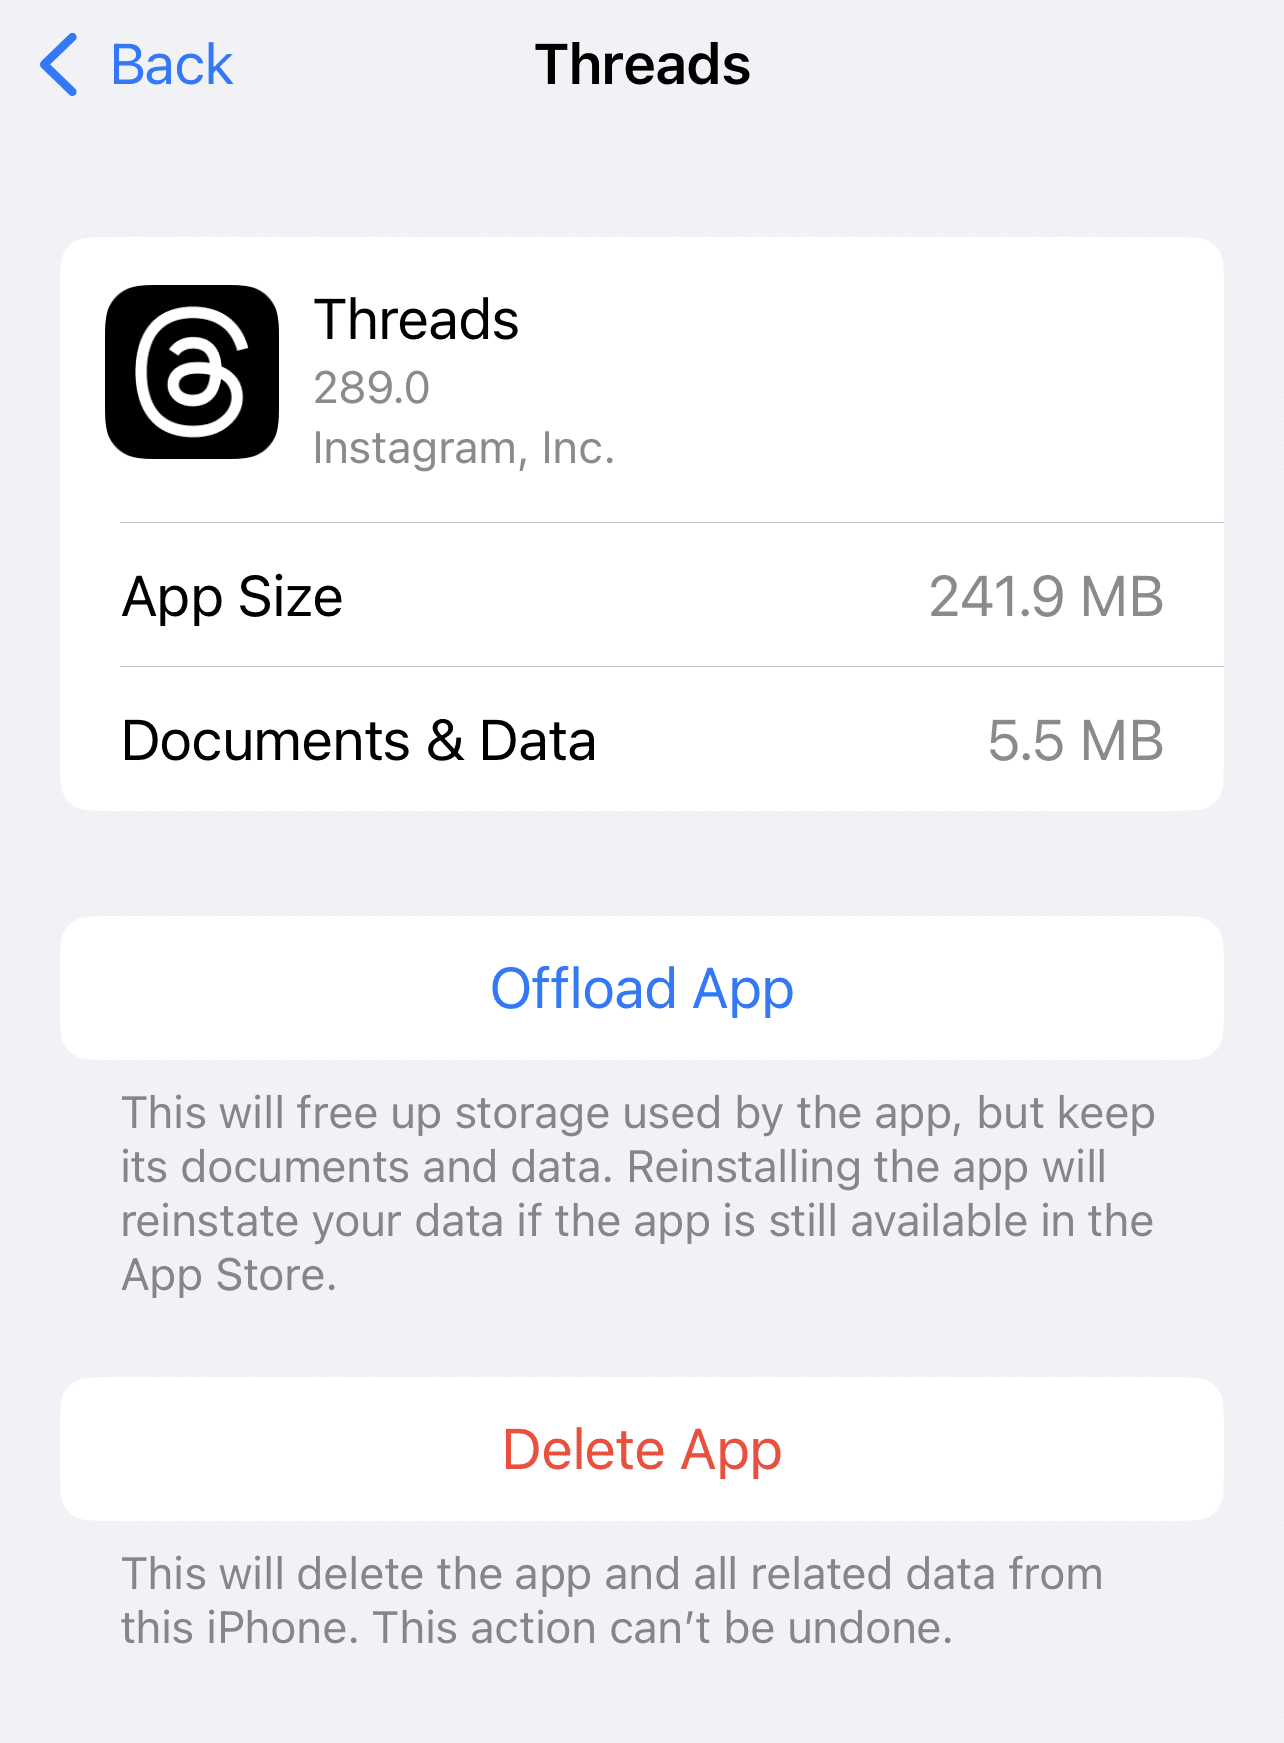 Clear threads app cache on iPhone or iOS device through settings to fix Instagram Threads app home page or feed not refreshing, loading new threads